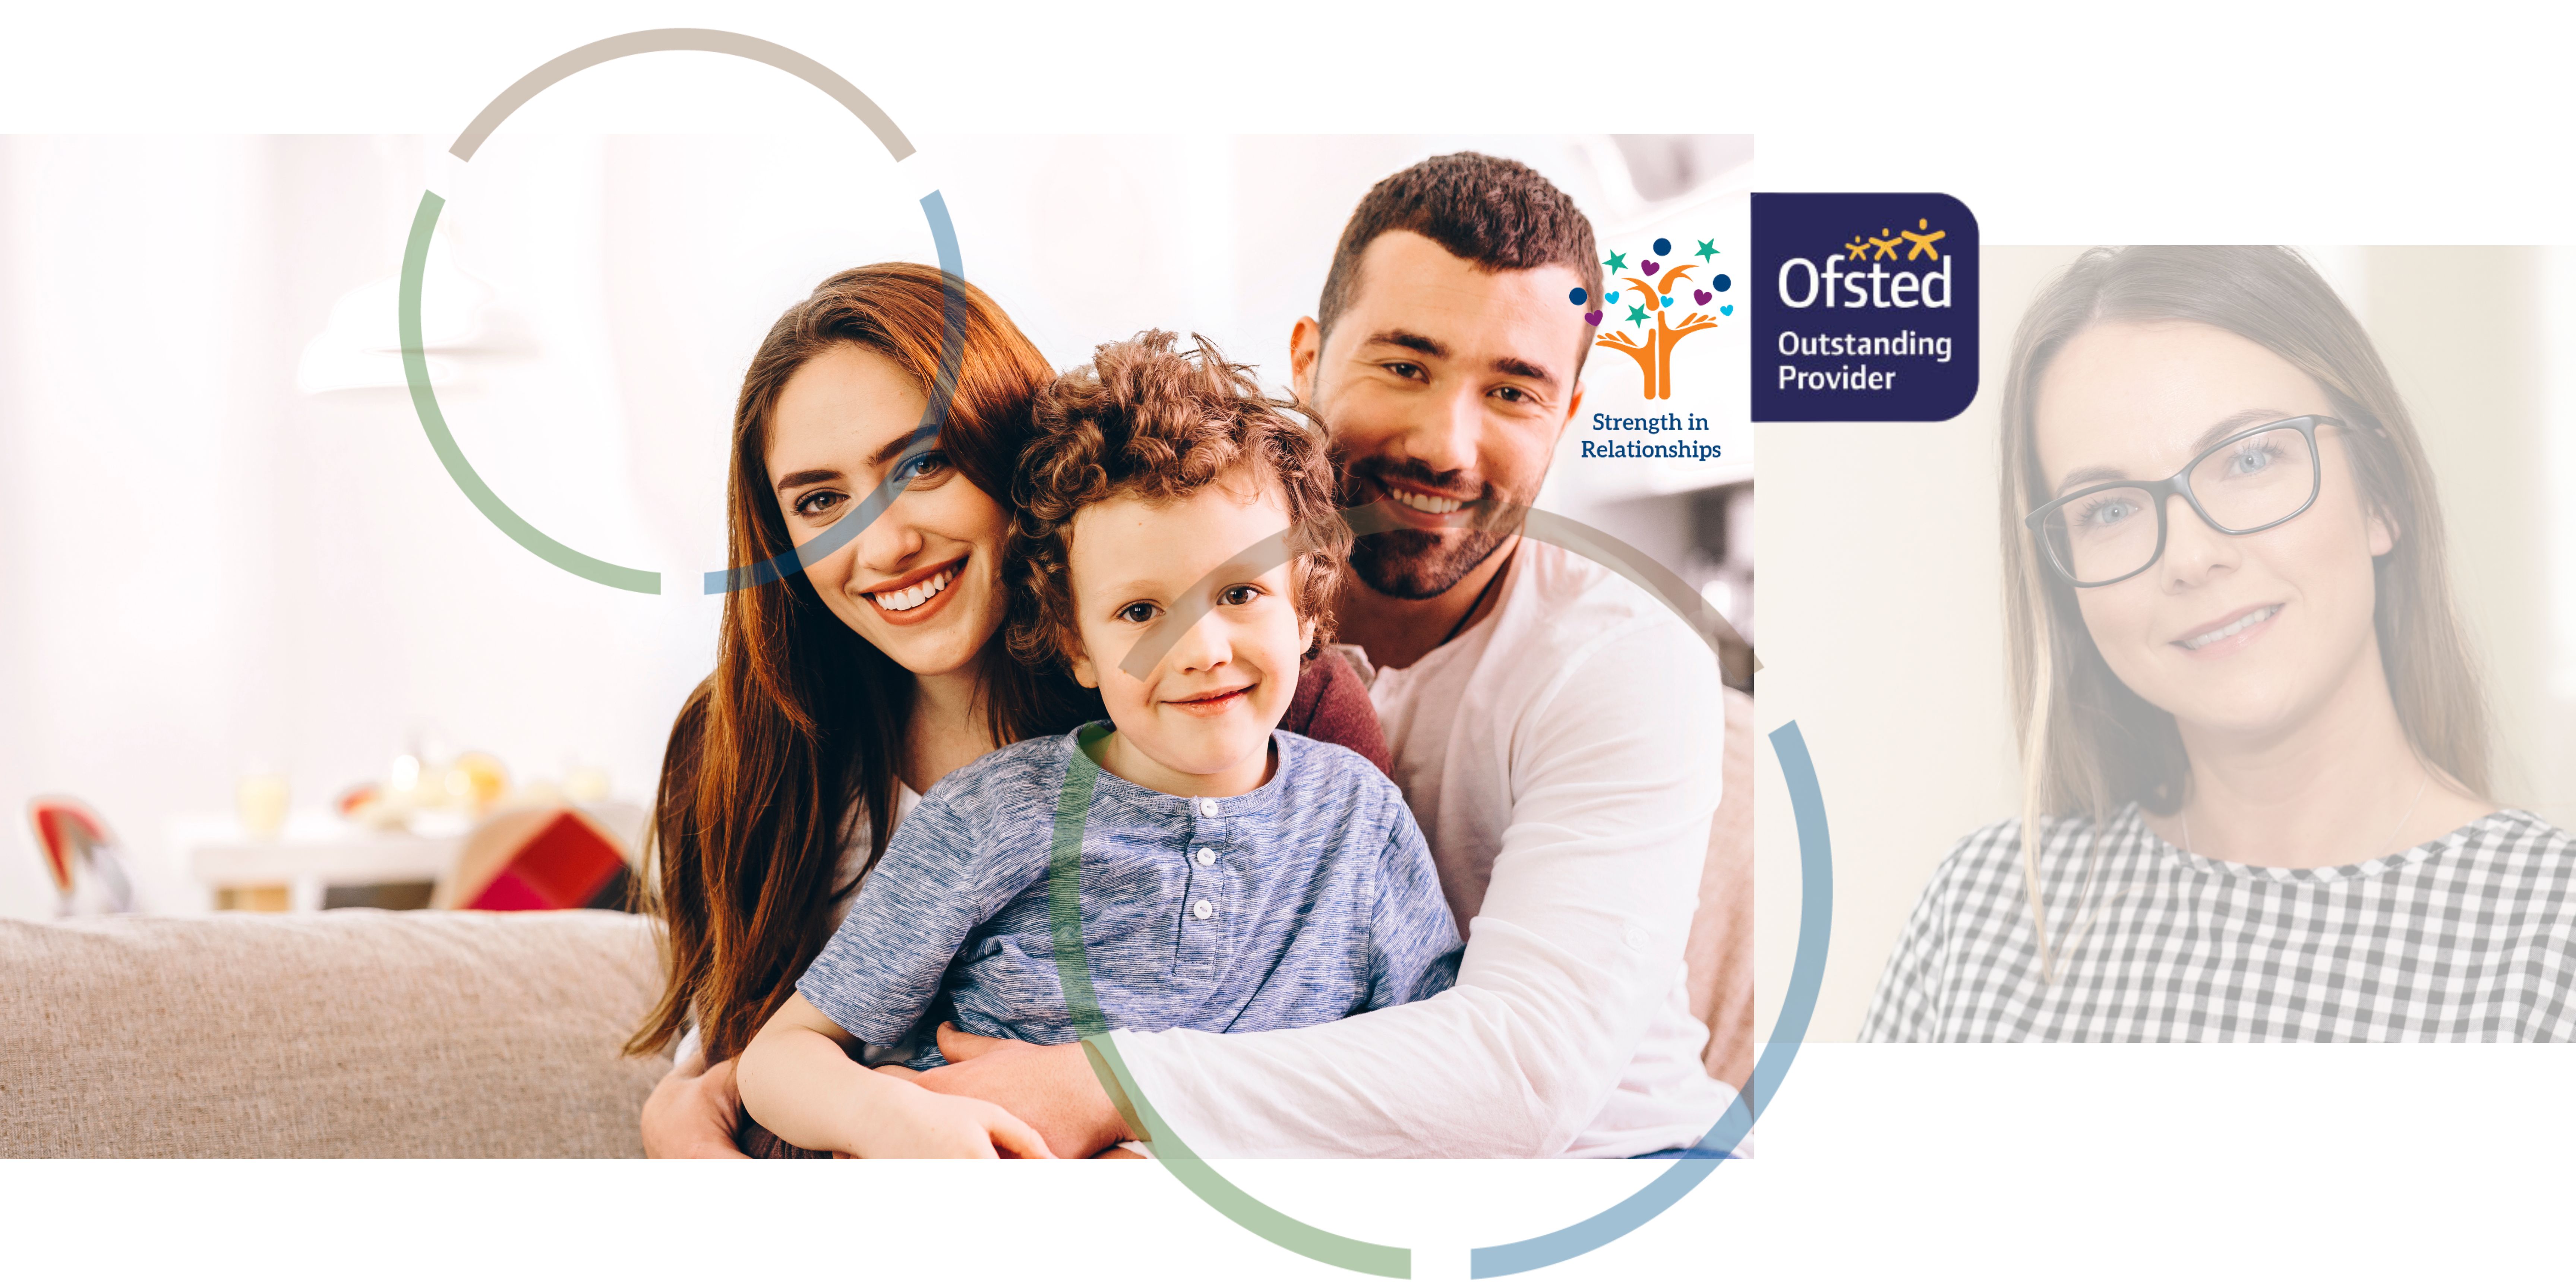 An image of a young family smiling next to a photograph portrait of a member of the children and families social work team with the Ofsted and strength in relationships logos.